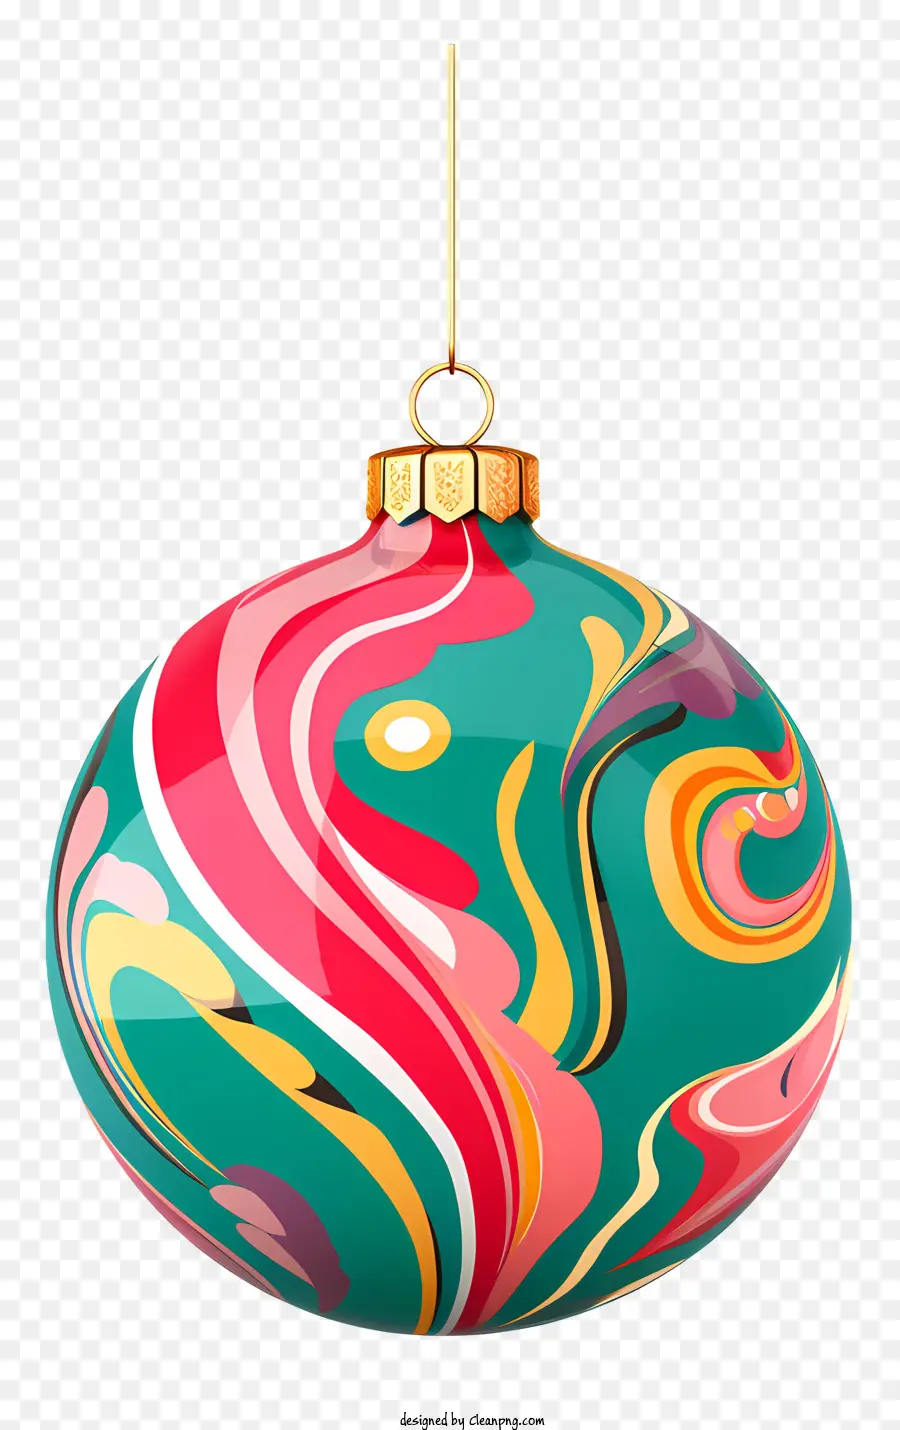 colorful ornament swirled design round ornament colorful cord yellow loop